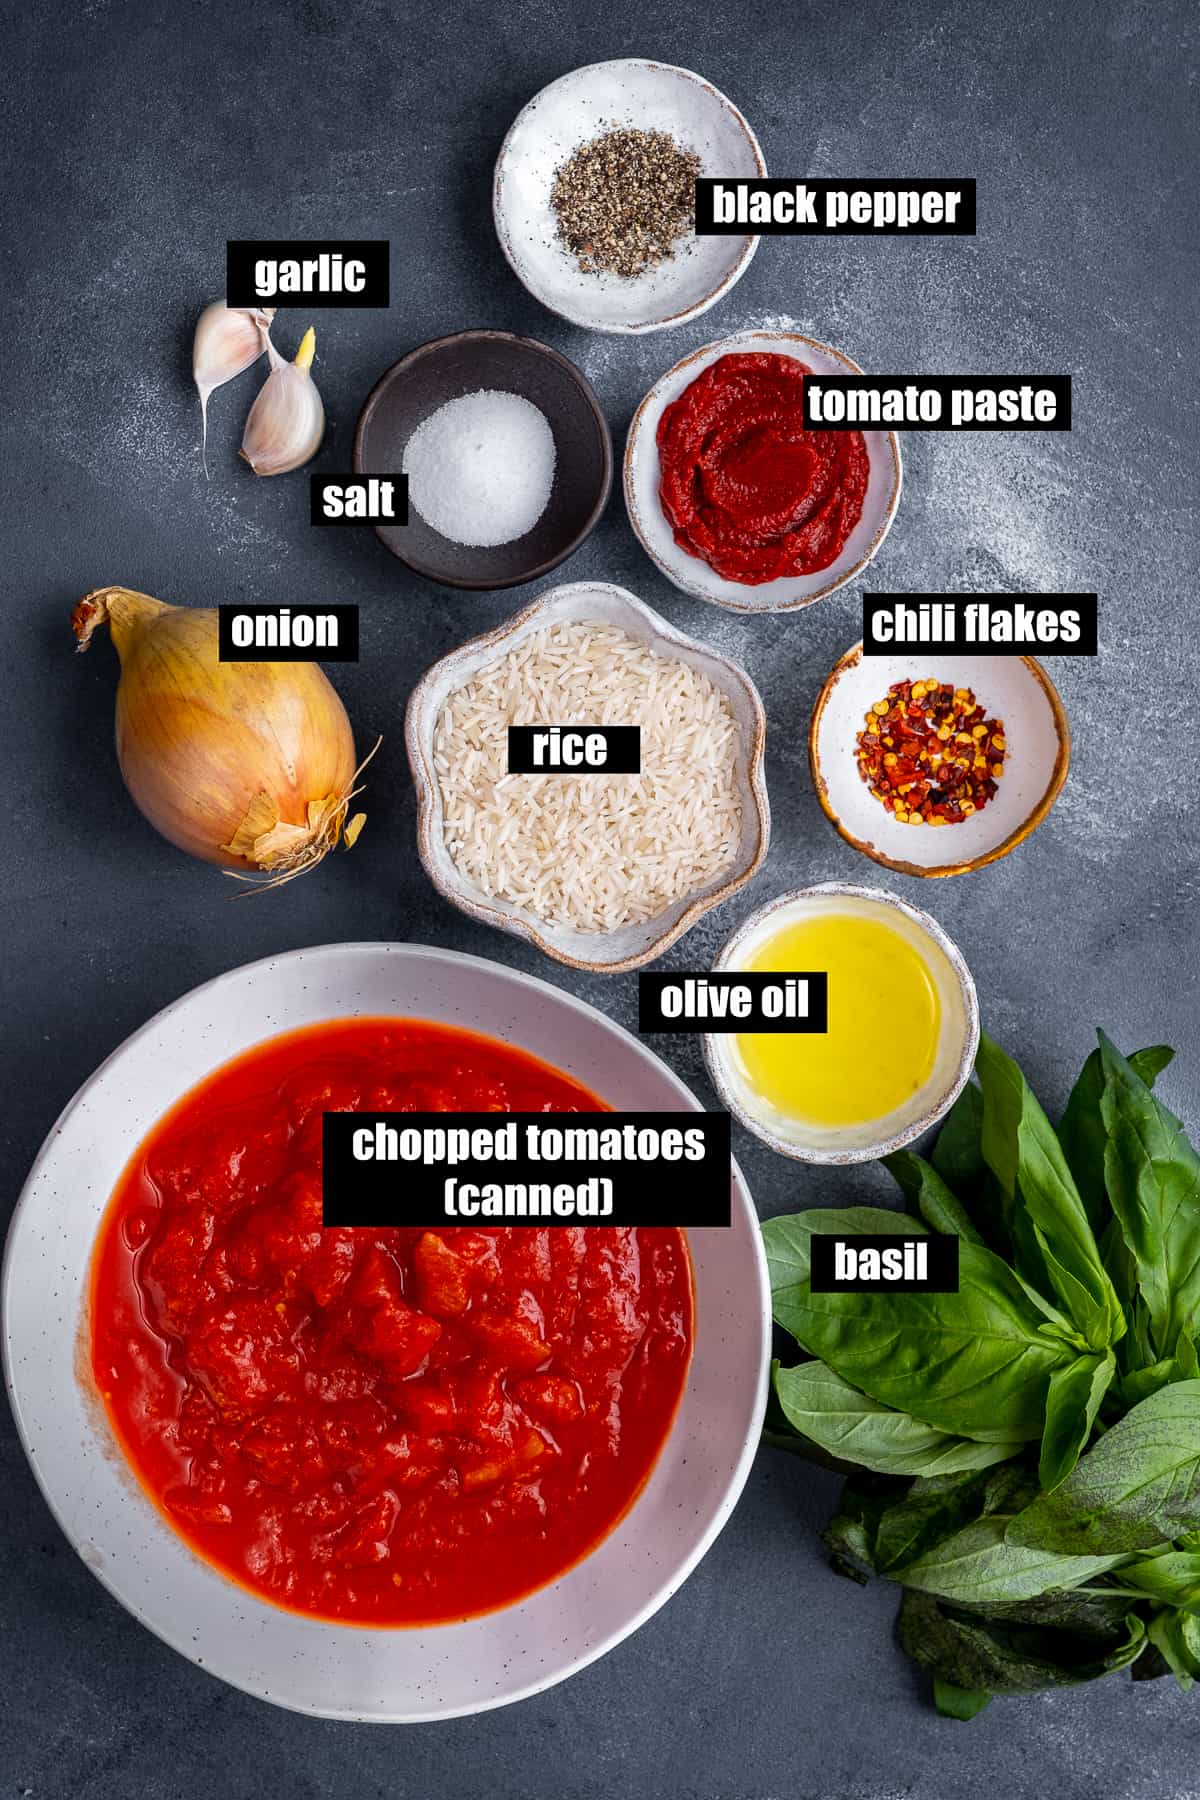 Chopped tomatoes, uncooked rice, tomato paste, red pepper flakes, salt and black pepper, onion, garlic cloves, olive oil and fresh basil on a dark backdrop.